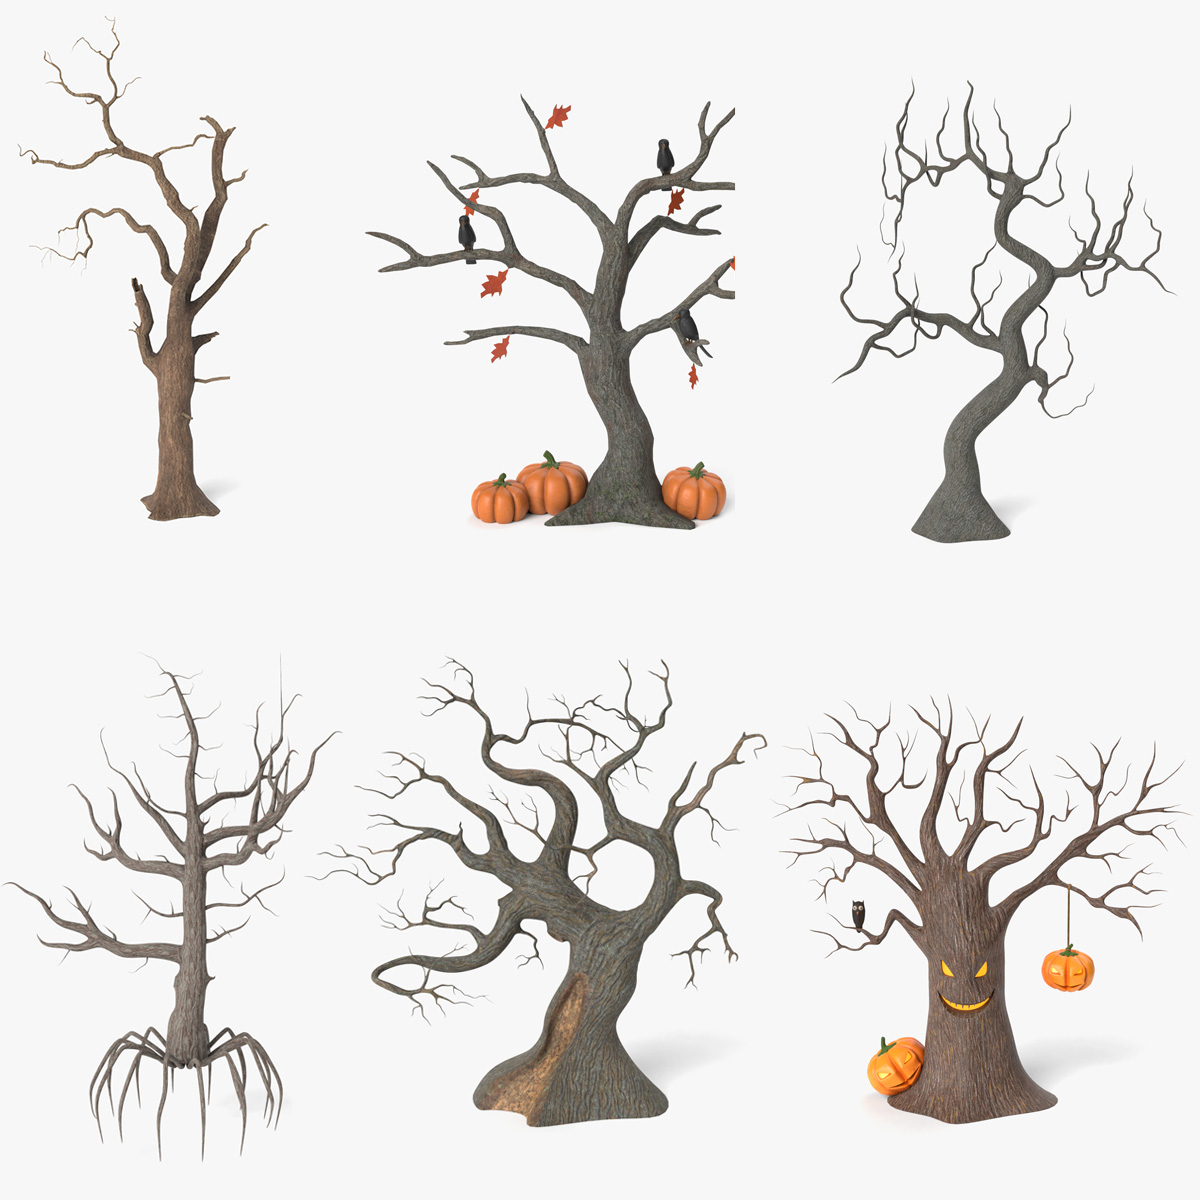 Our favorite 3D model from the collection of Abrams Studios: a collection of 3D spooky trees.